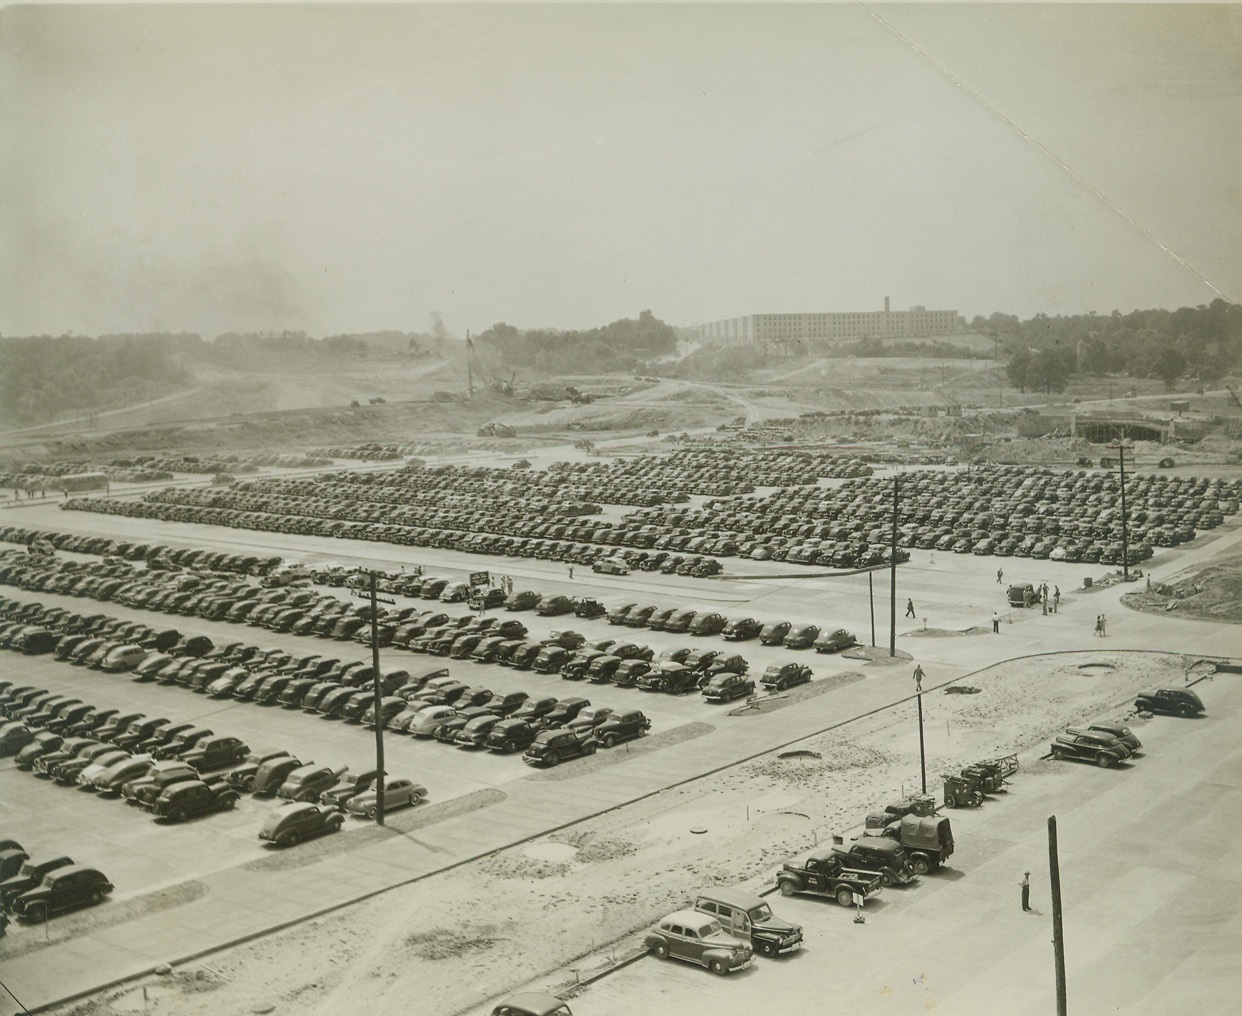 War Department Workers Jam Parking Space, 7/30/1942. WASHINGTON, D.C. – Although the new War Department pentagon building is not fully occupied, thousands of automobiles jam the parking space adjacent to the new building. The field is especially laid out to accommodate workers in the new building. Credit: (ACME);